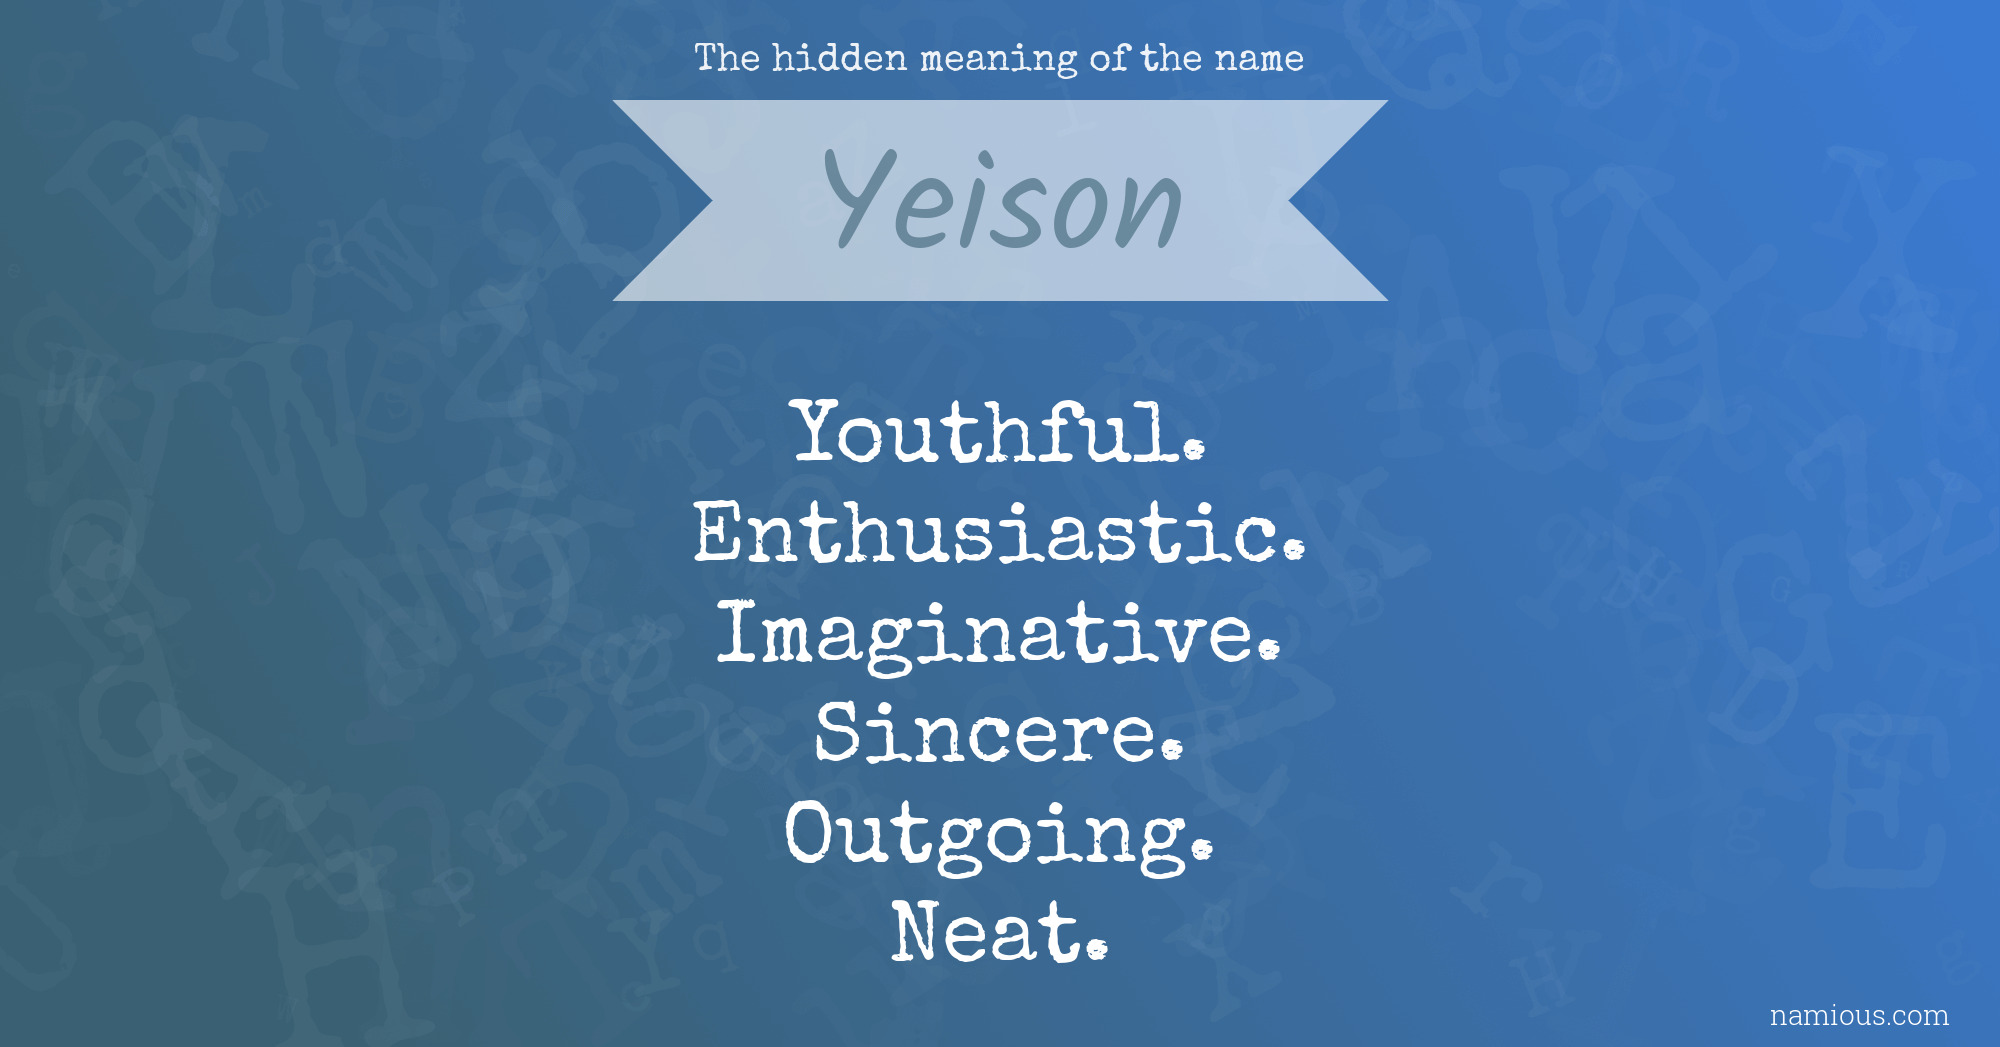 The hidden meaning of the name Yeison